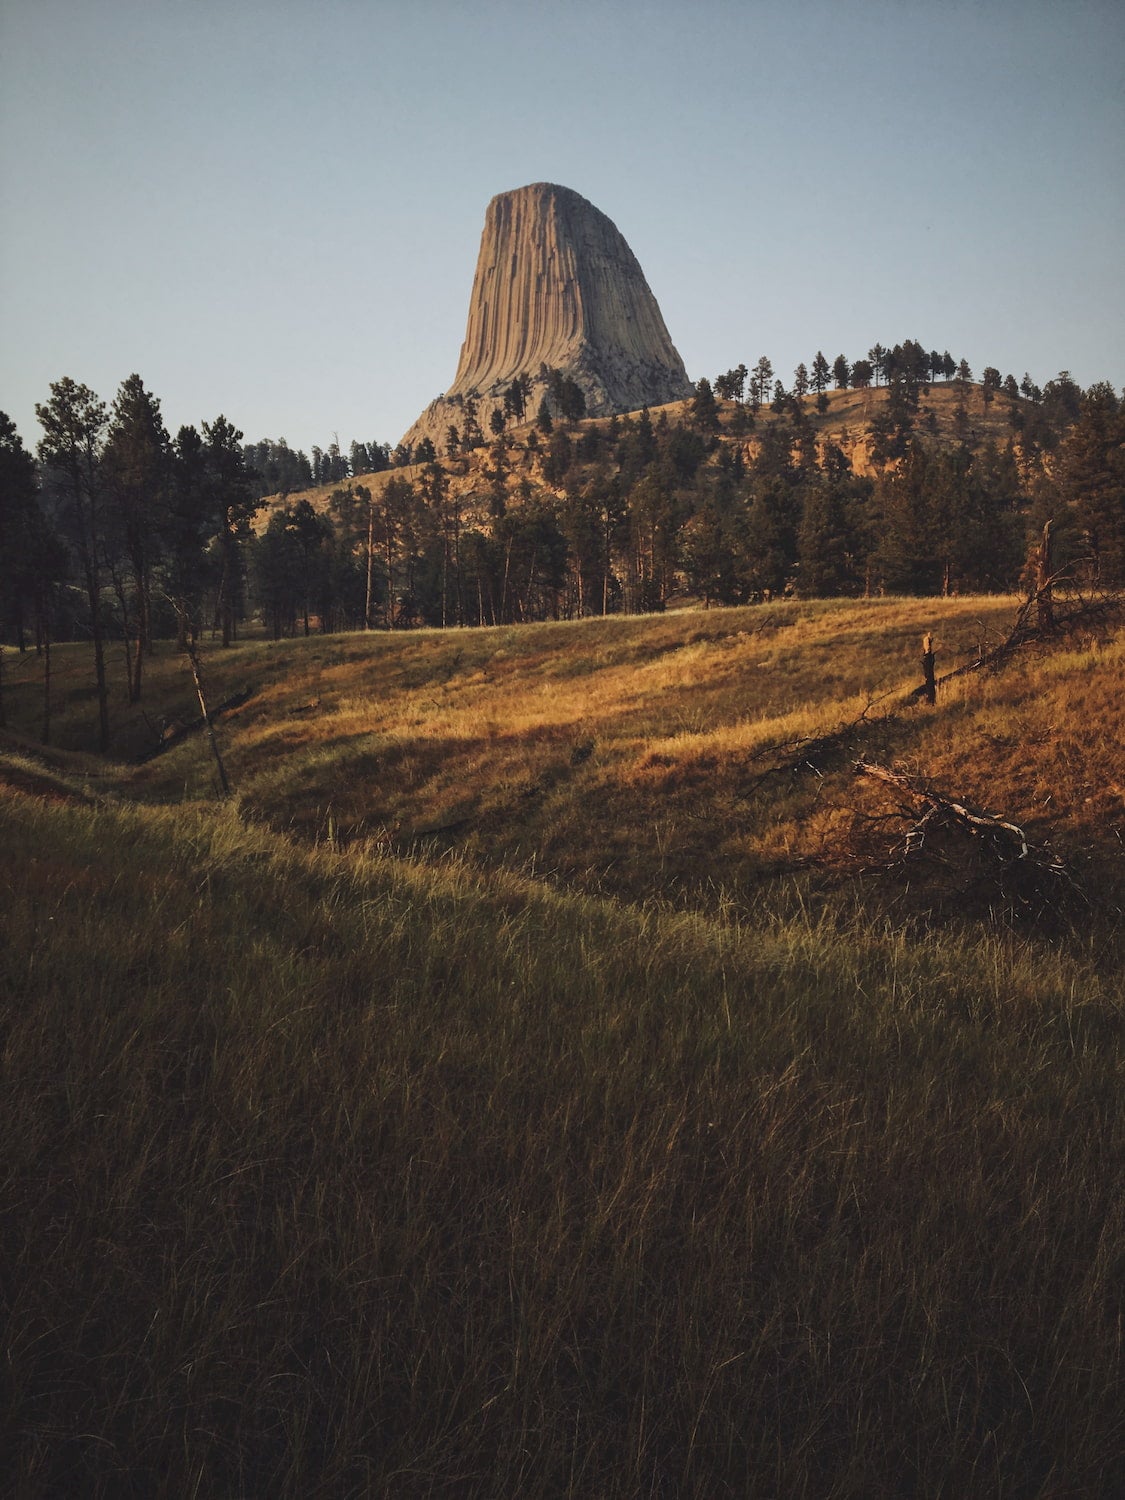 Devils tower rock formation with rolling hills in the foregroound.